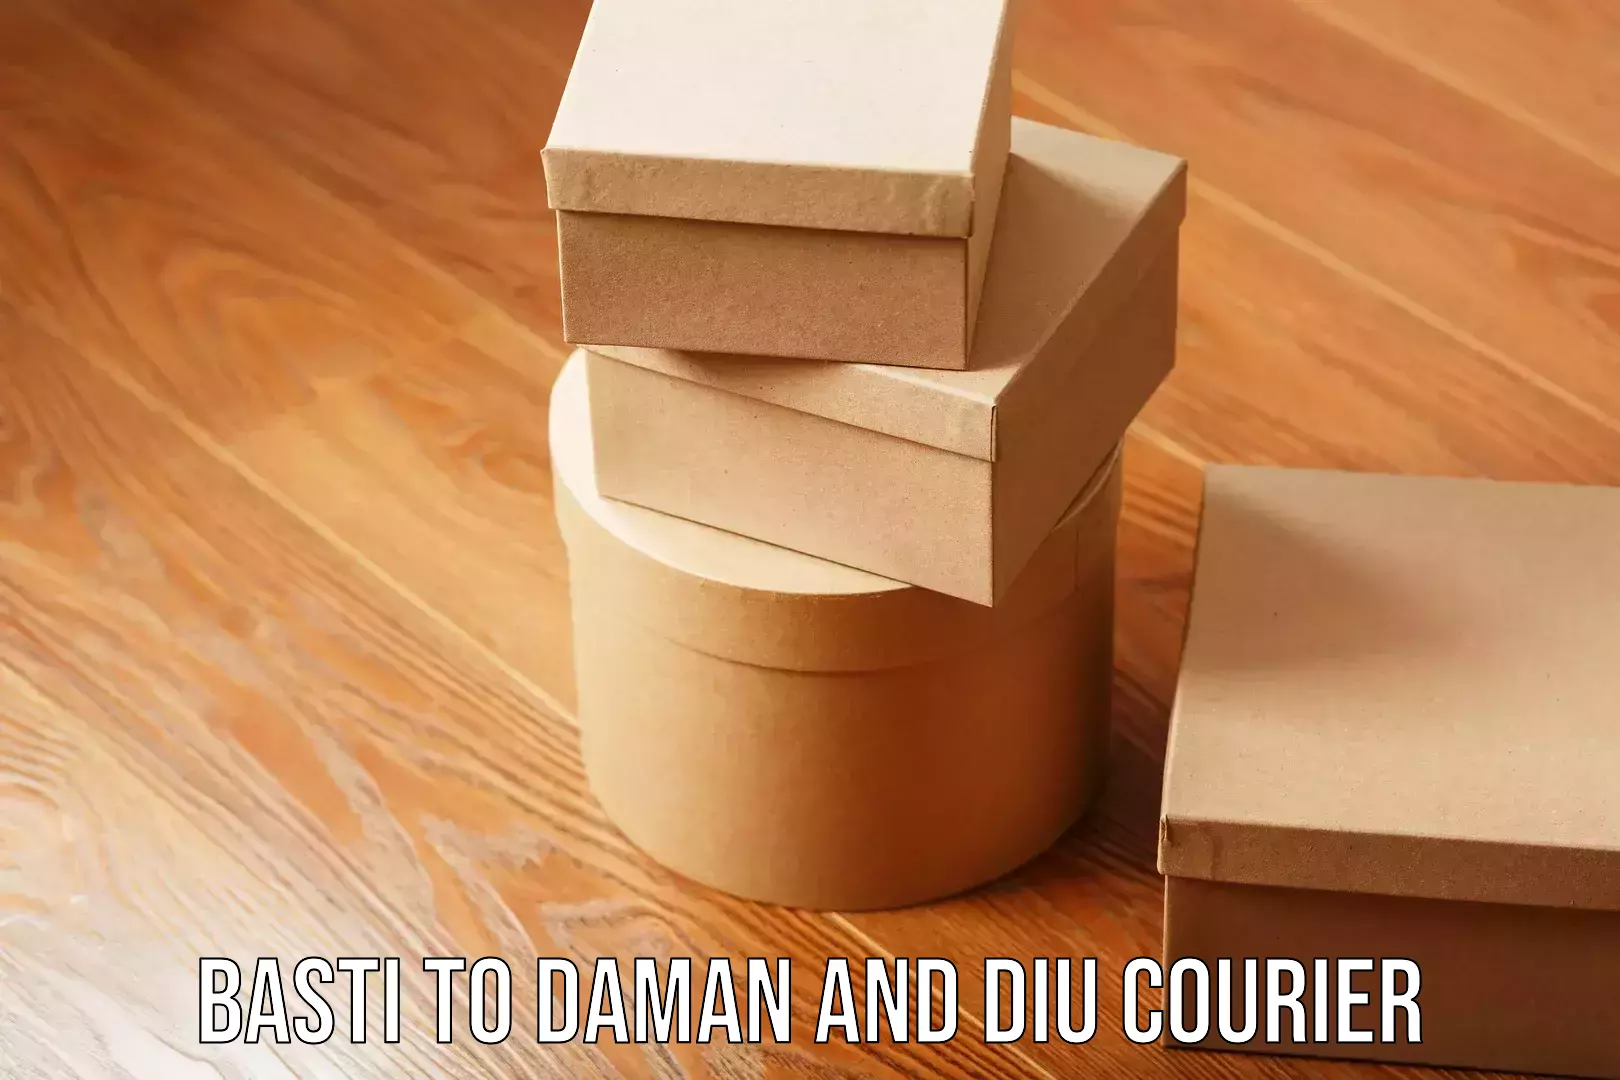 State-of-the-art courier technology Basti to Daman